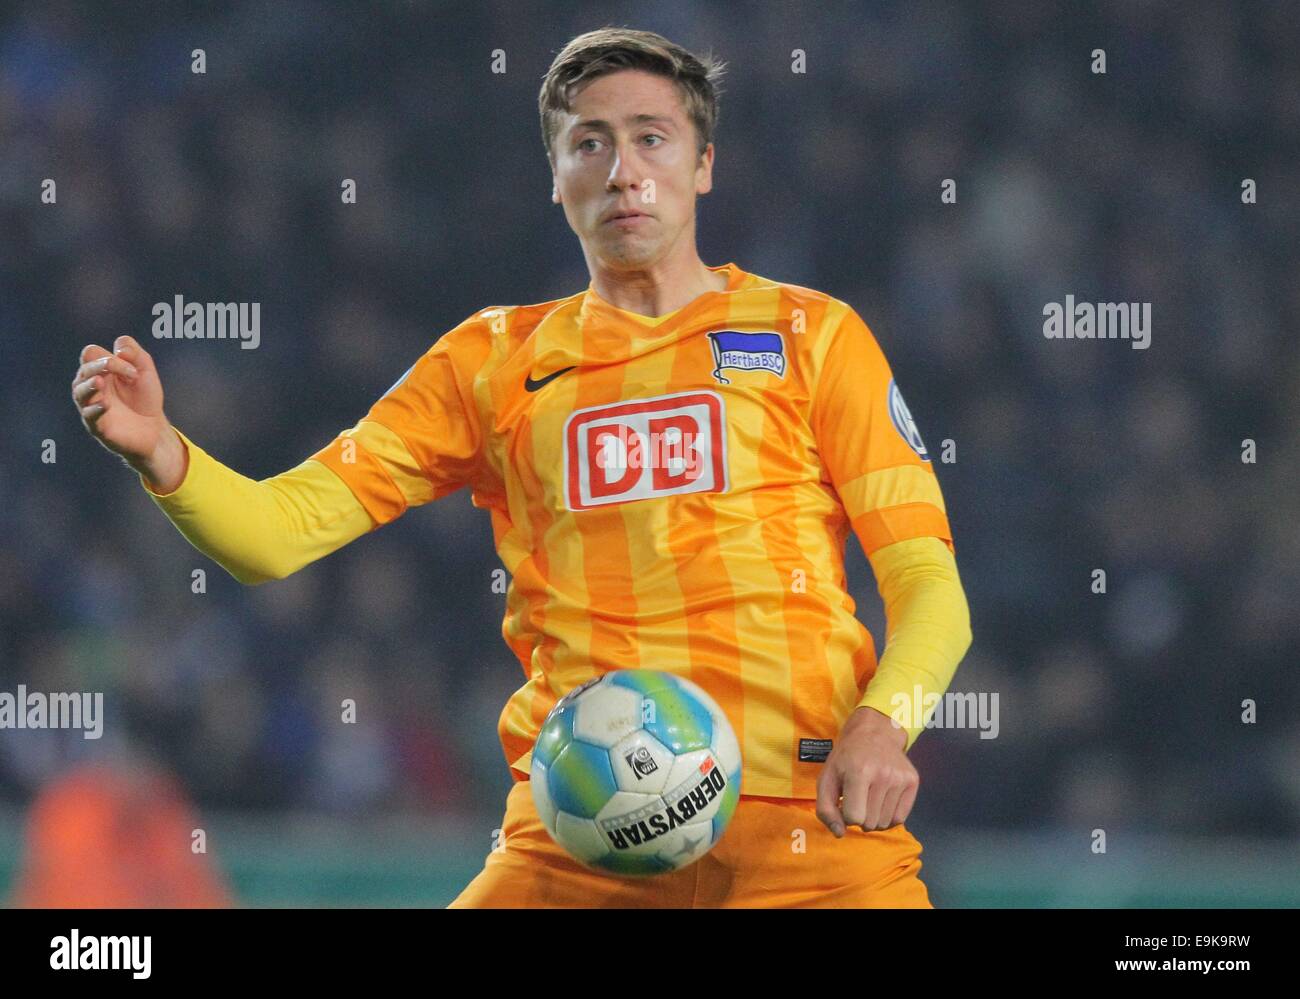 Bielefeld, Germany. 28th Oct, 2014. Berlin's Jens Hegeler with the ball during the German DFB-Cup match between Arminia Bielefeld and Hertha BSC at the Schueco Arena in Bielefeld, Germany, 28 October 2014. Credit:  dpa picture alliance/Alamy Live News Stock Photo